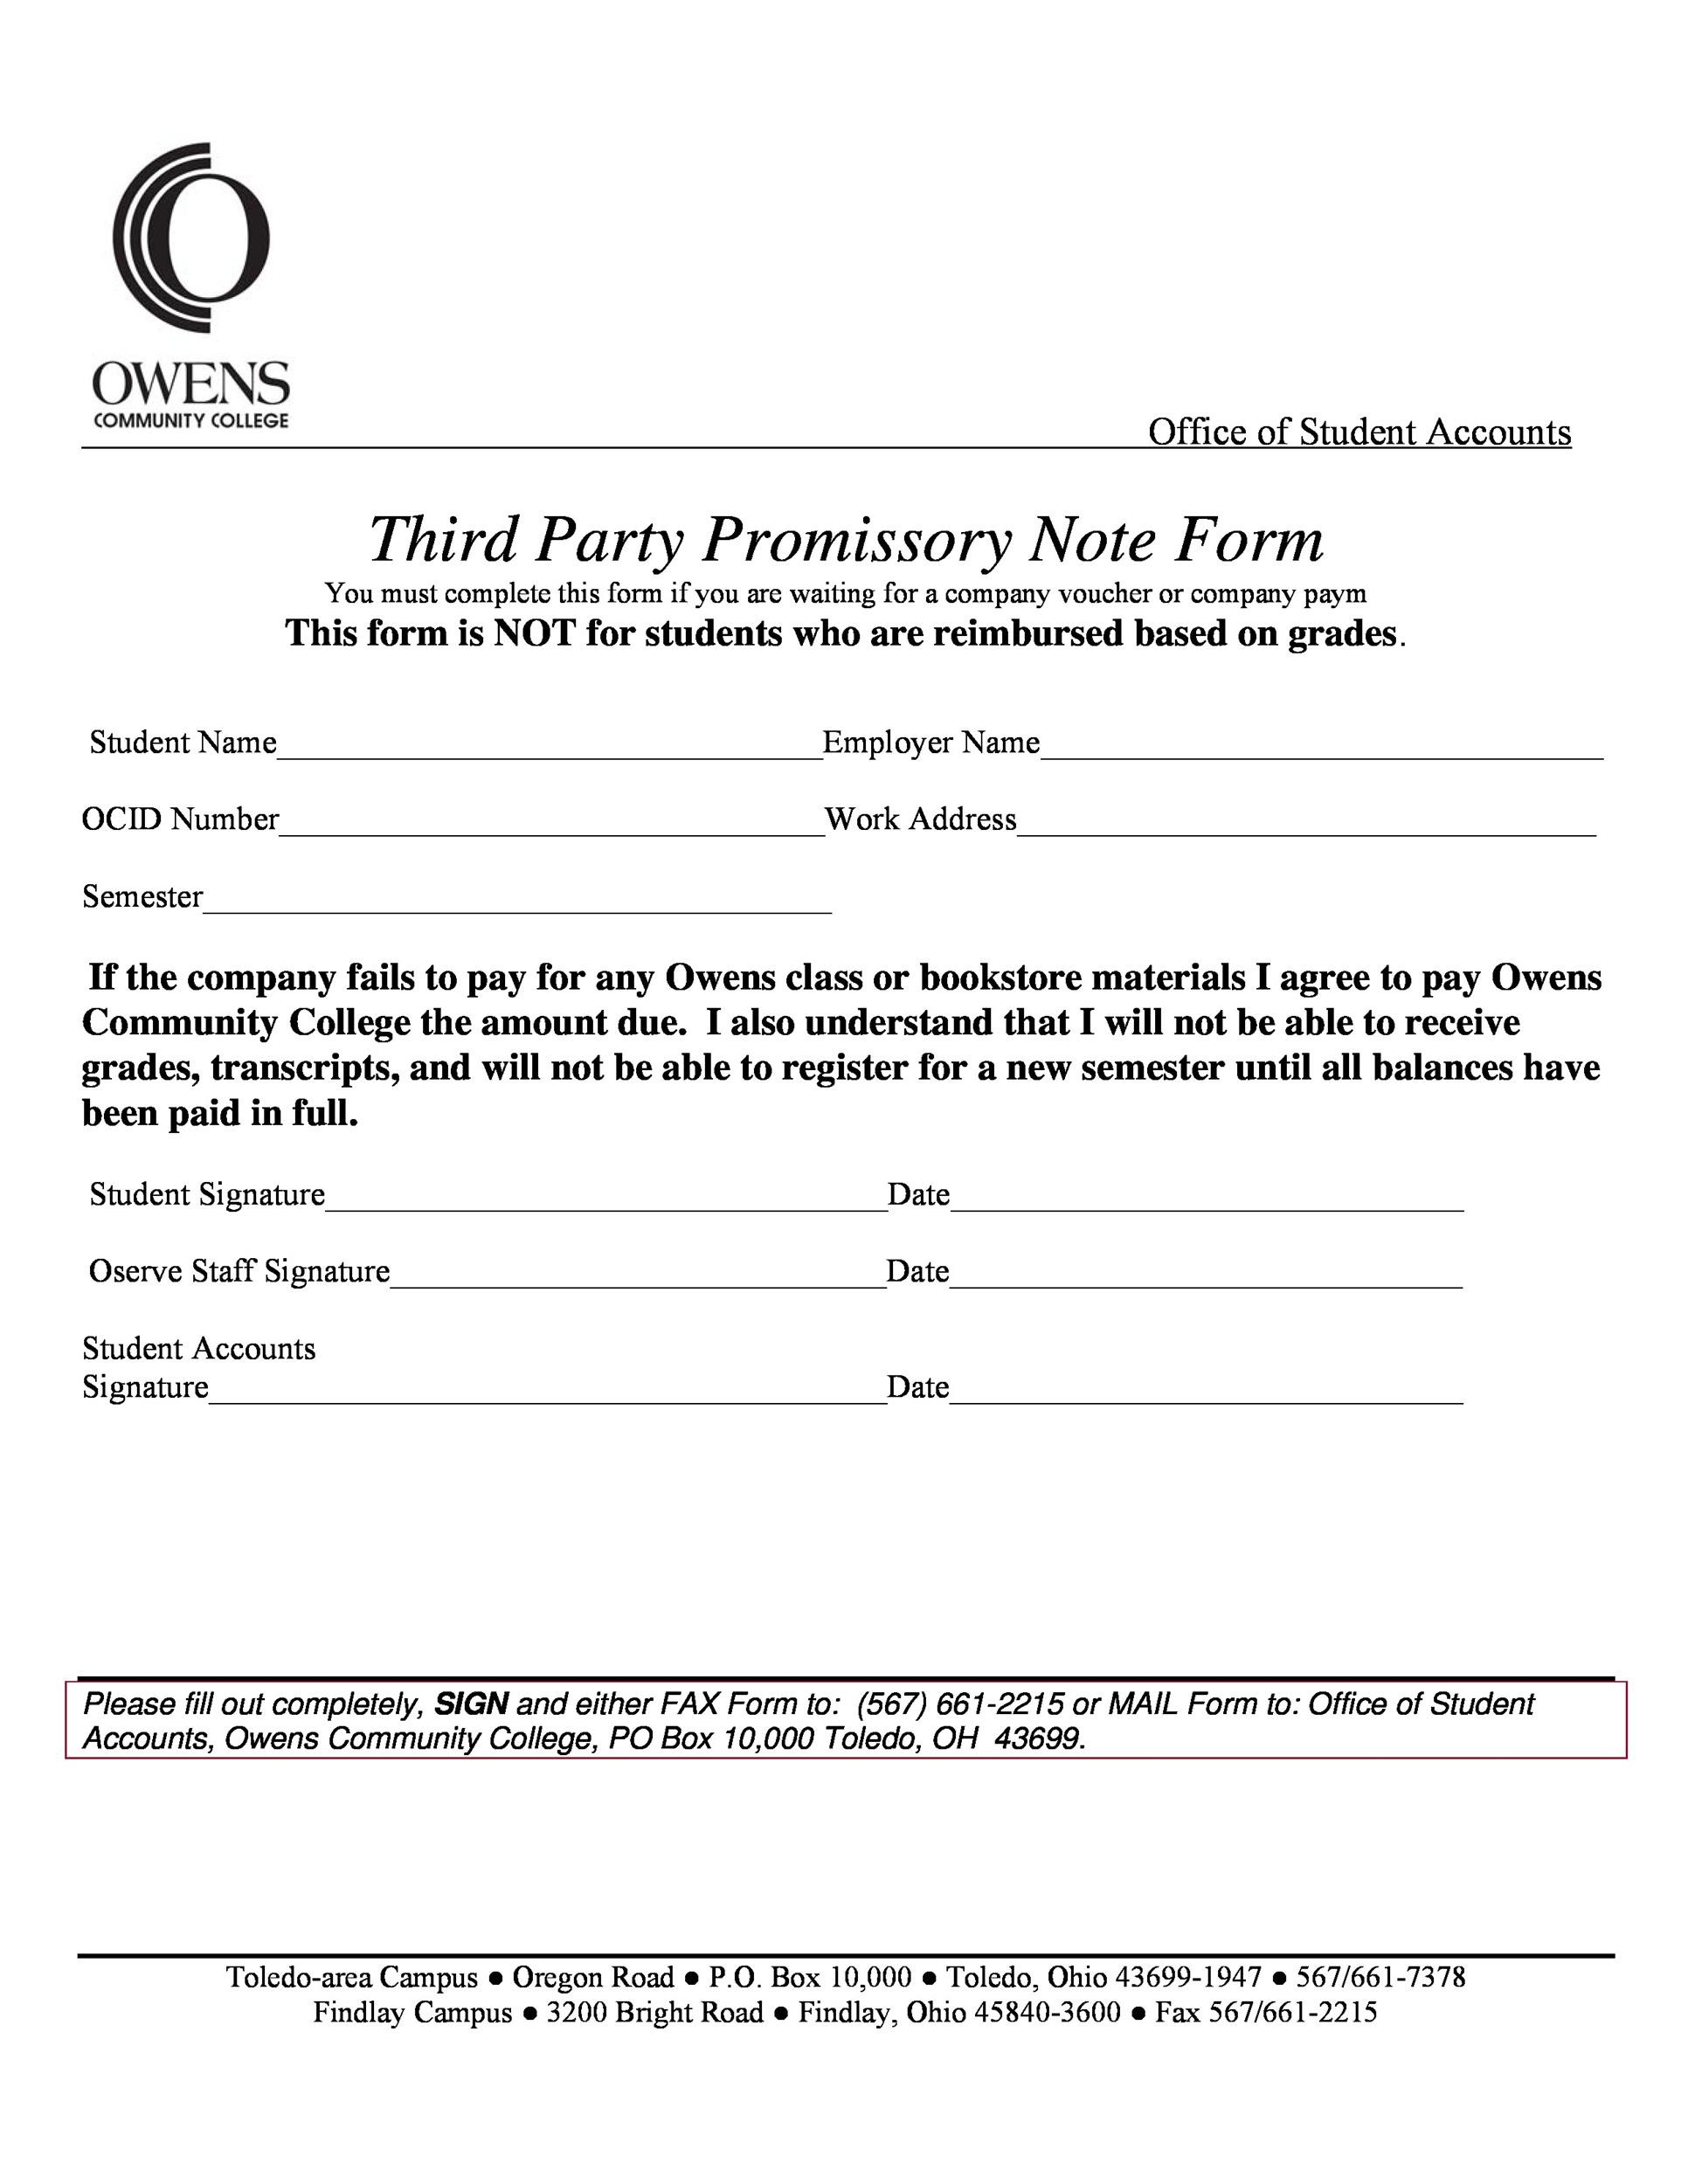 45-free-promissory-note-templates-forms-word-pdf-template-lab